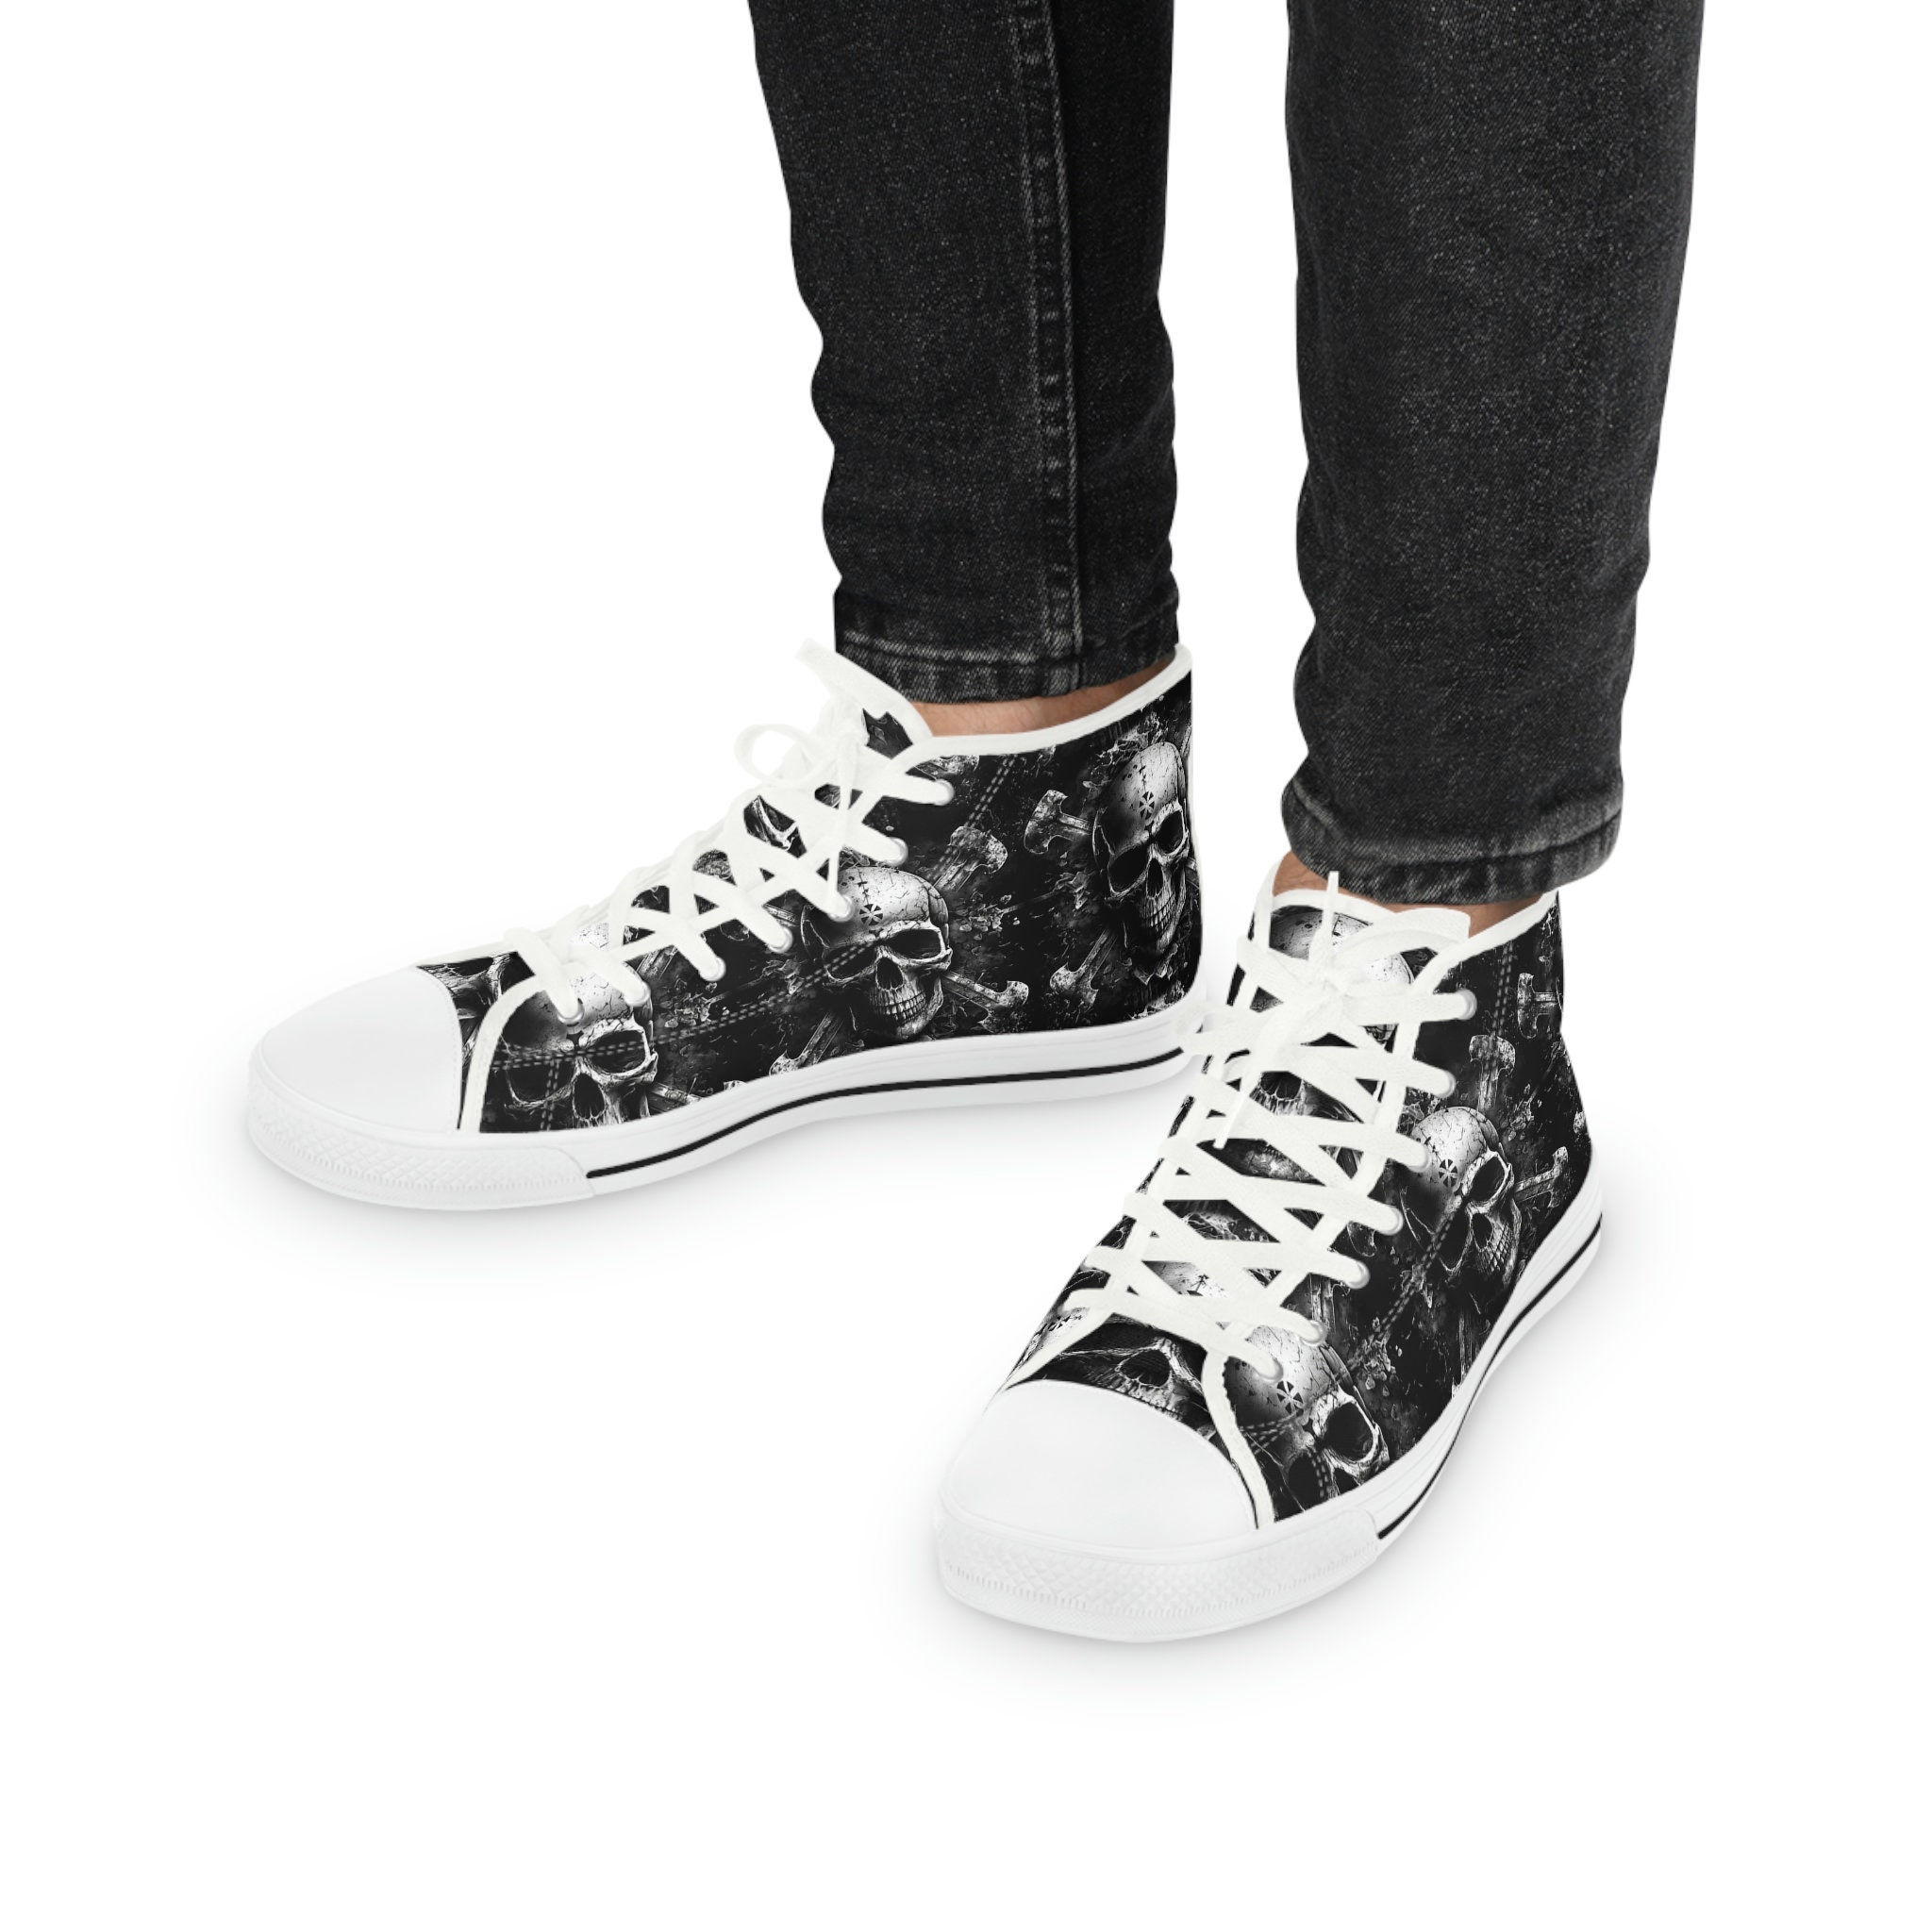 Discover Men's High Top Sneakers with Skull Design